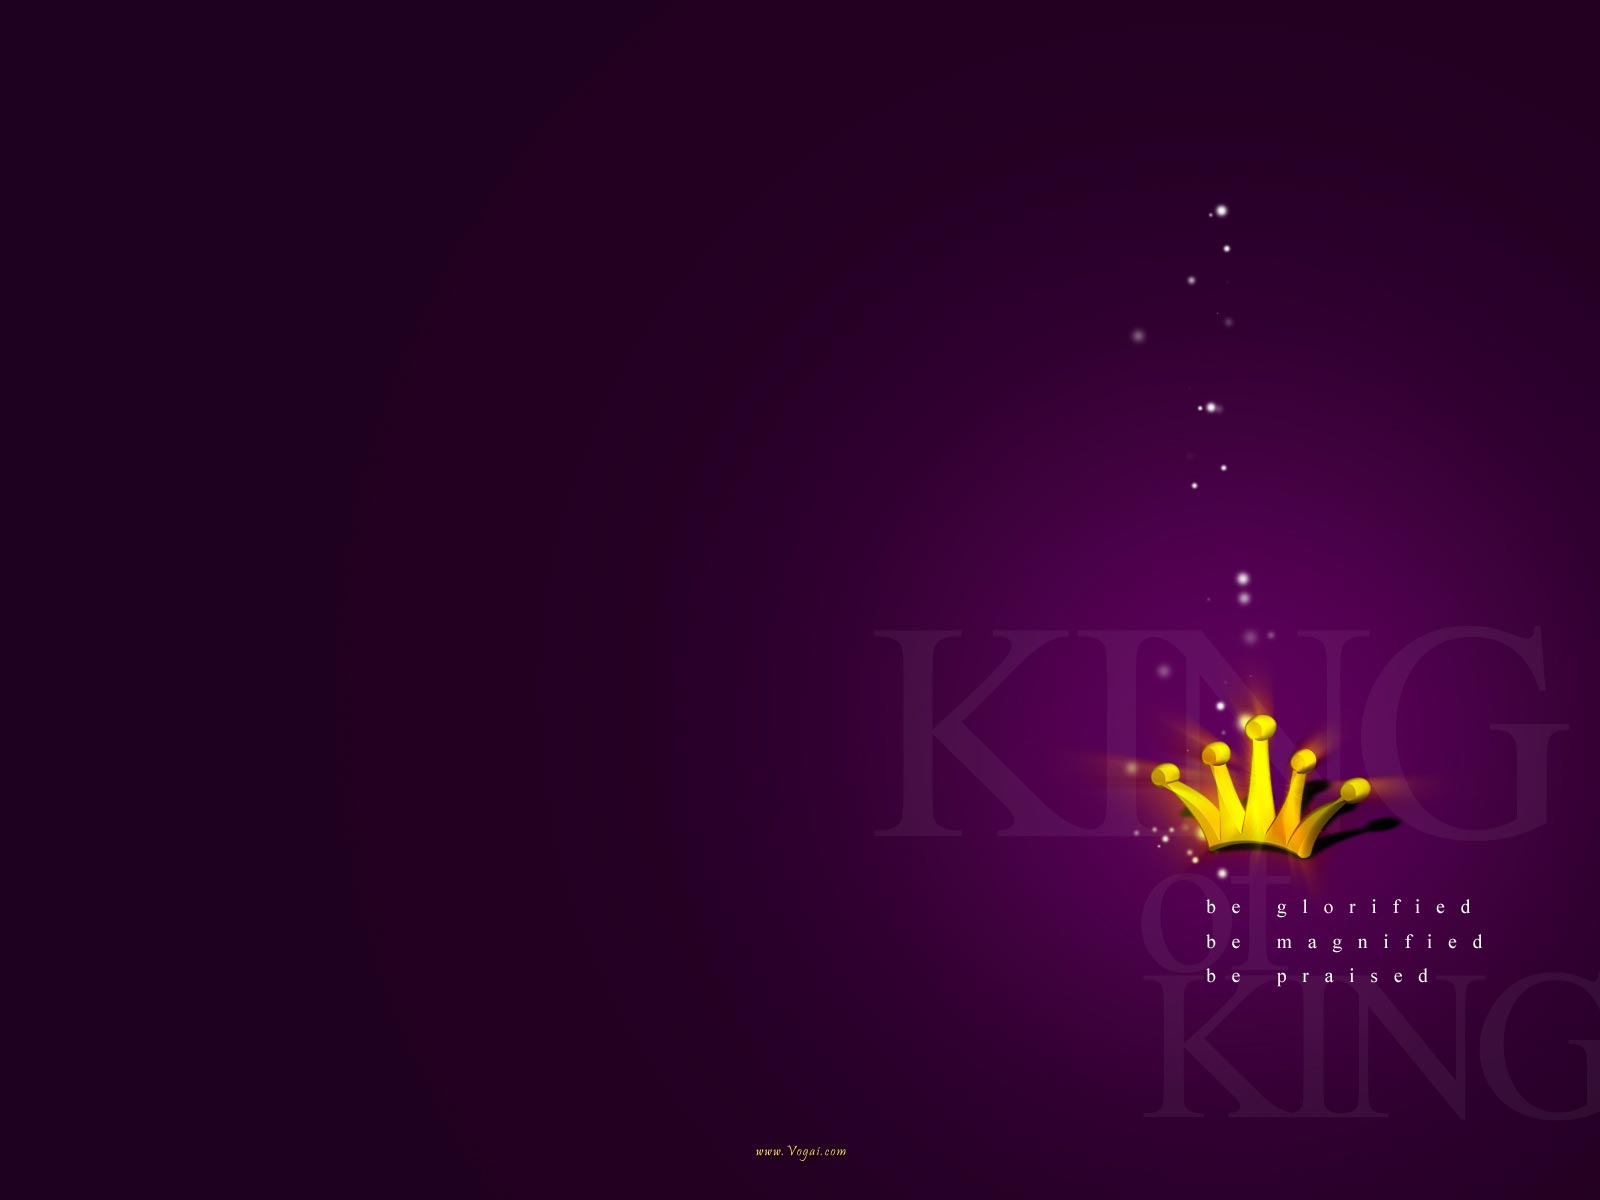 Free download Christian Graphic King of Kings Violet Background [1600x1200] for your Desktop, Mobile & Tablet. Explore The Crown Wallpaper. The Crown Wallpaper, Crown Wallpaper, Crown Wallpaper